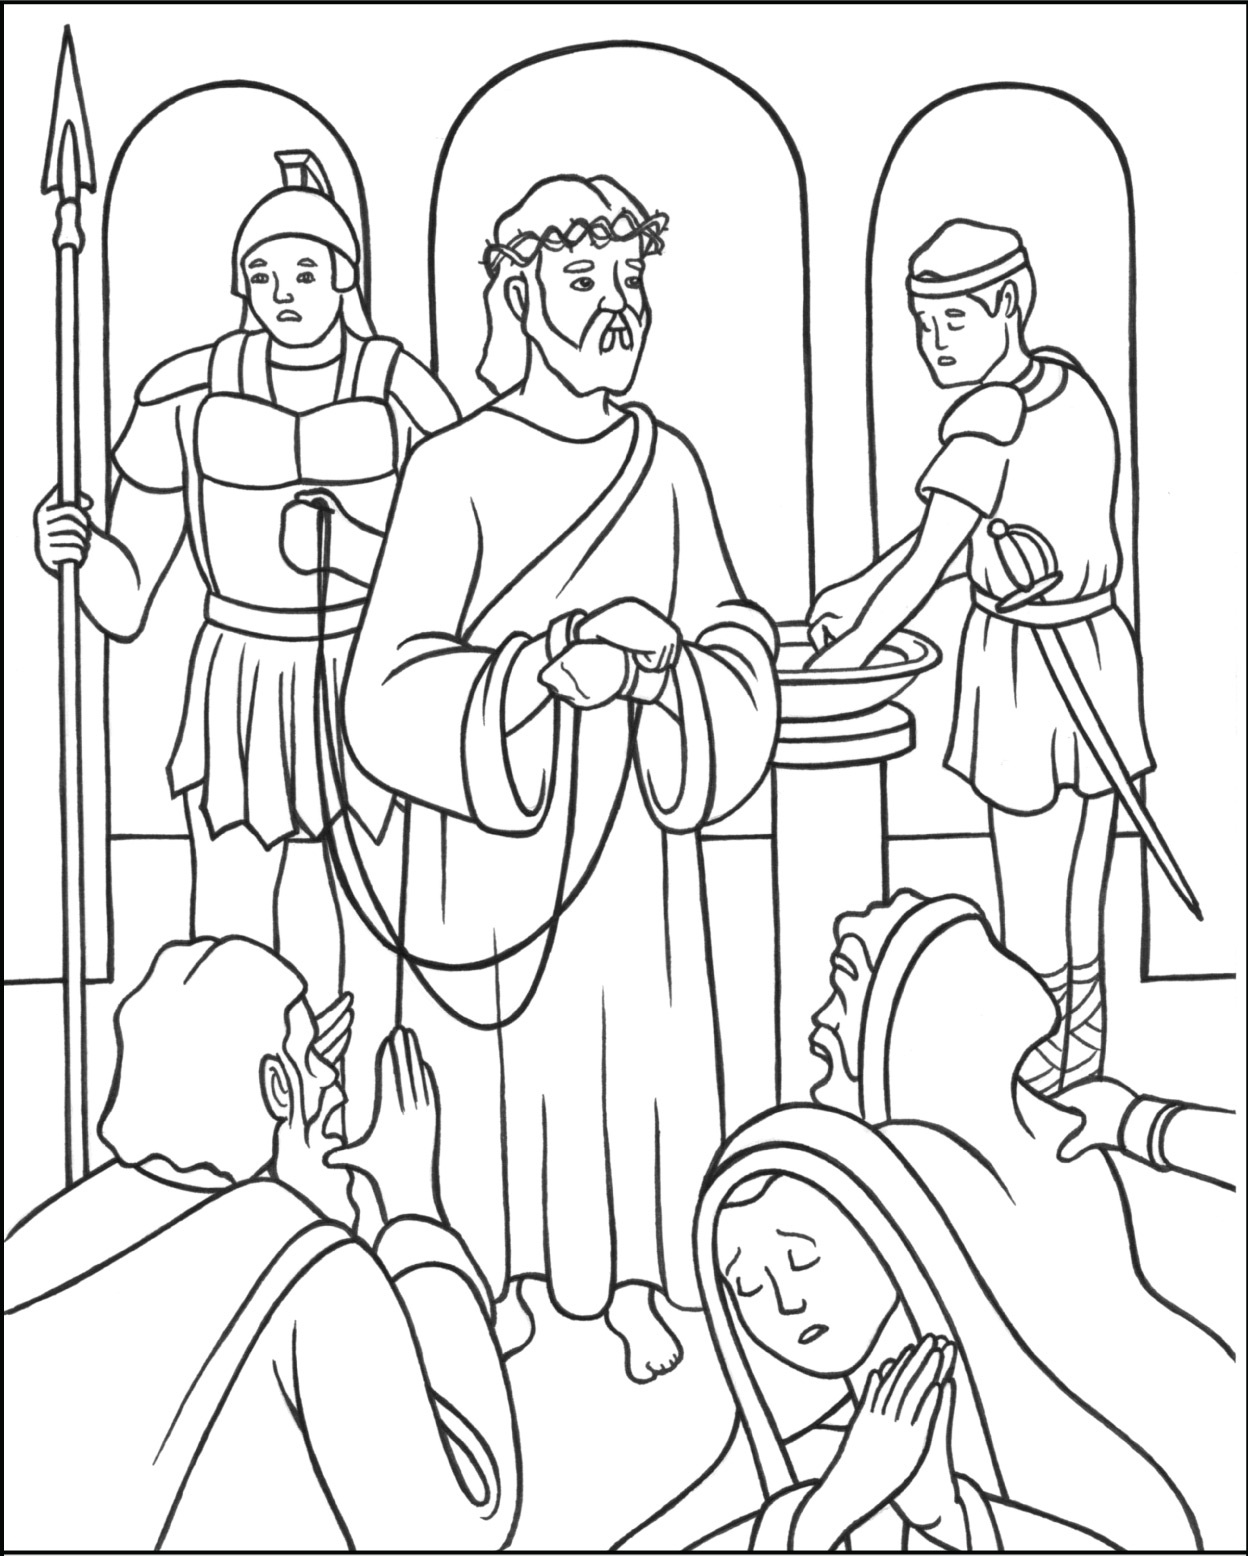 Thirteenth Station Stations of the Cross Coloring - Play Free Coloring ...